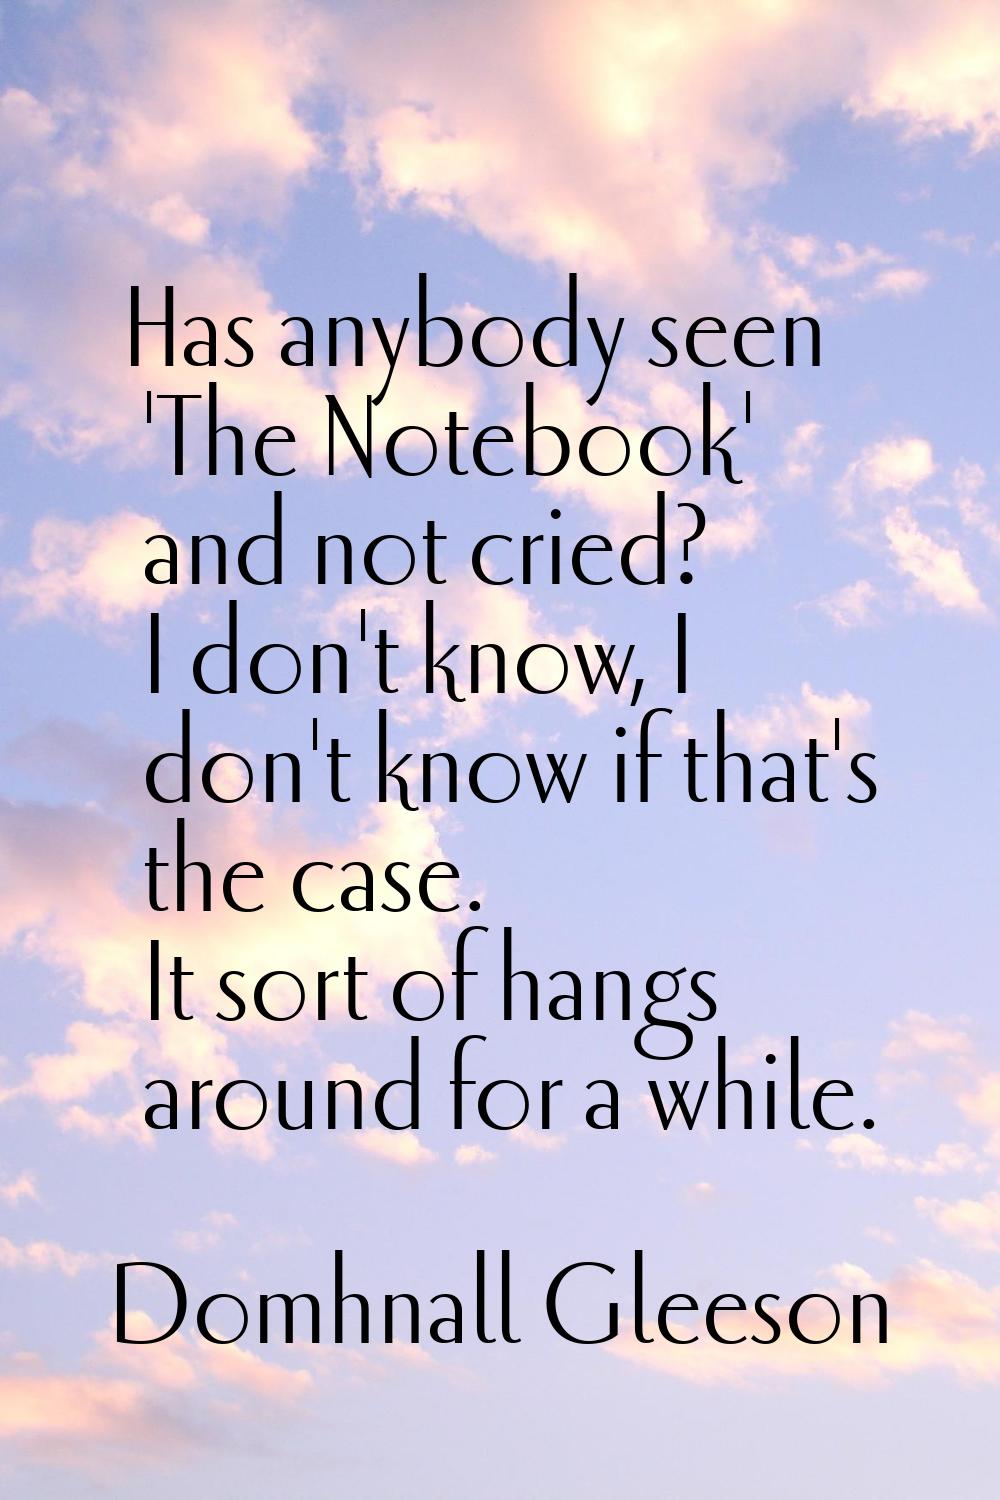 Has anybody seen 'The Notebook' and not cried? I don't know, I don't know if that's the case. It so